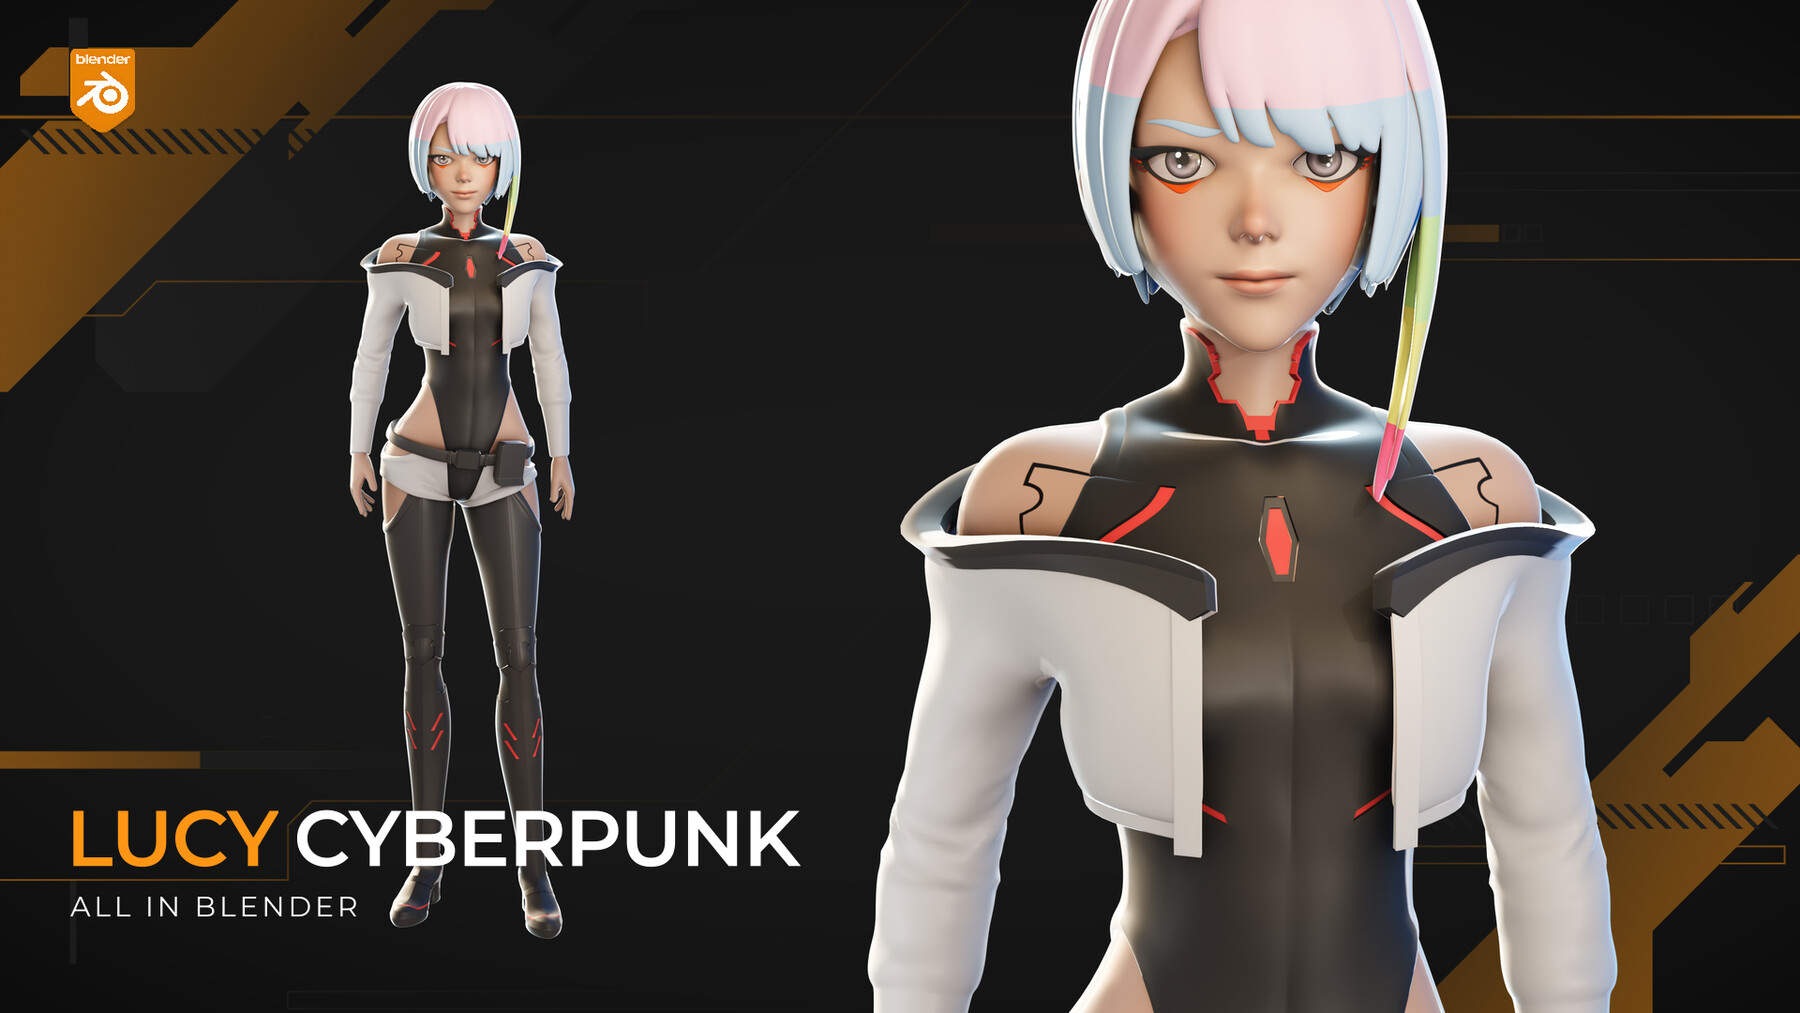 Character from the anime cyberpunk edgerunners